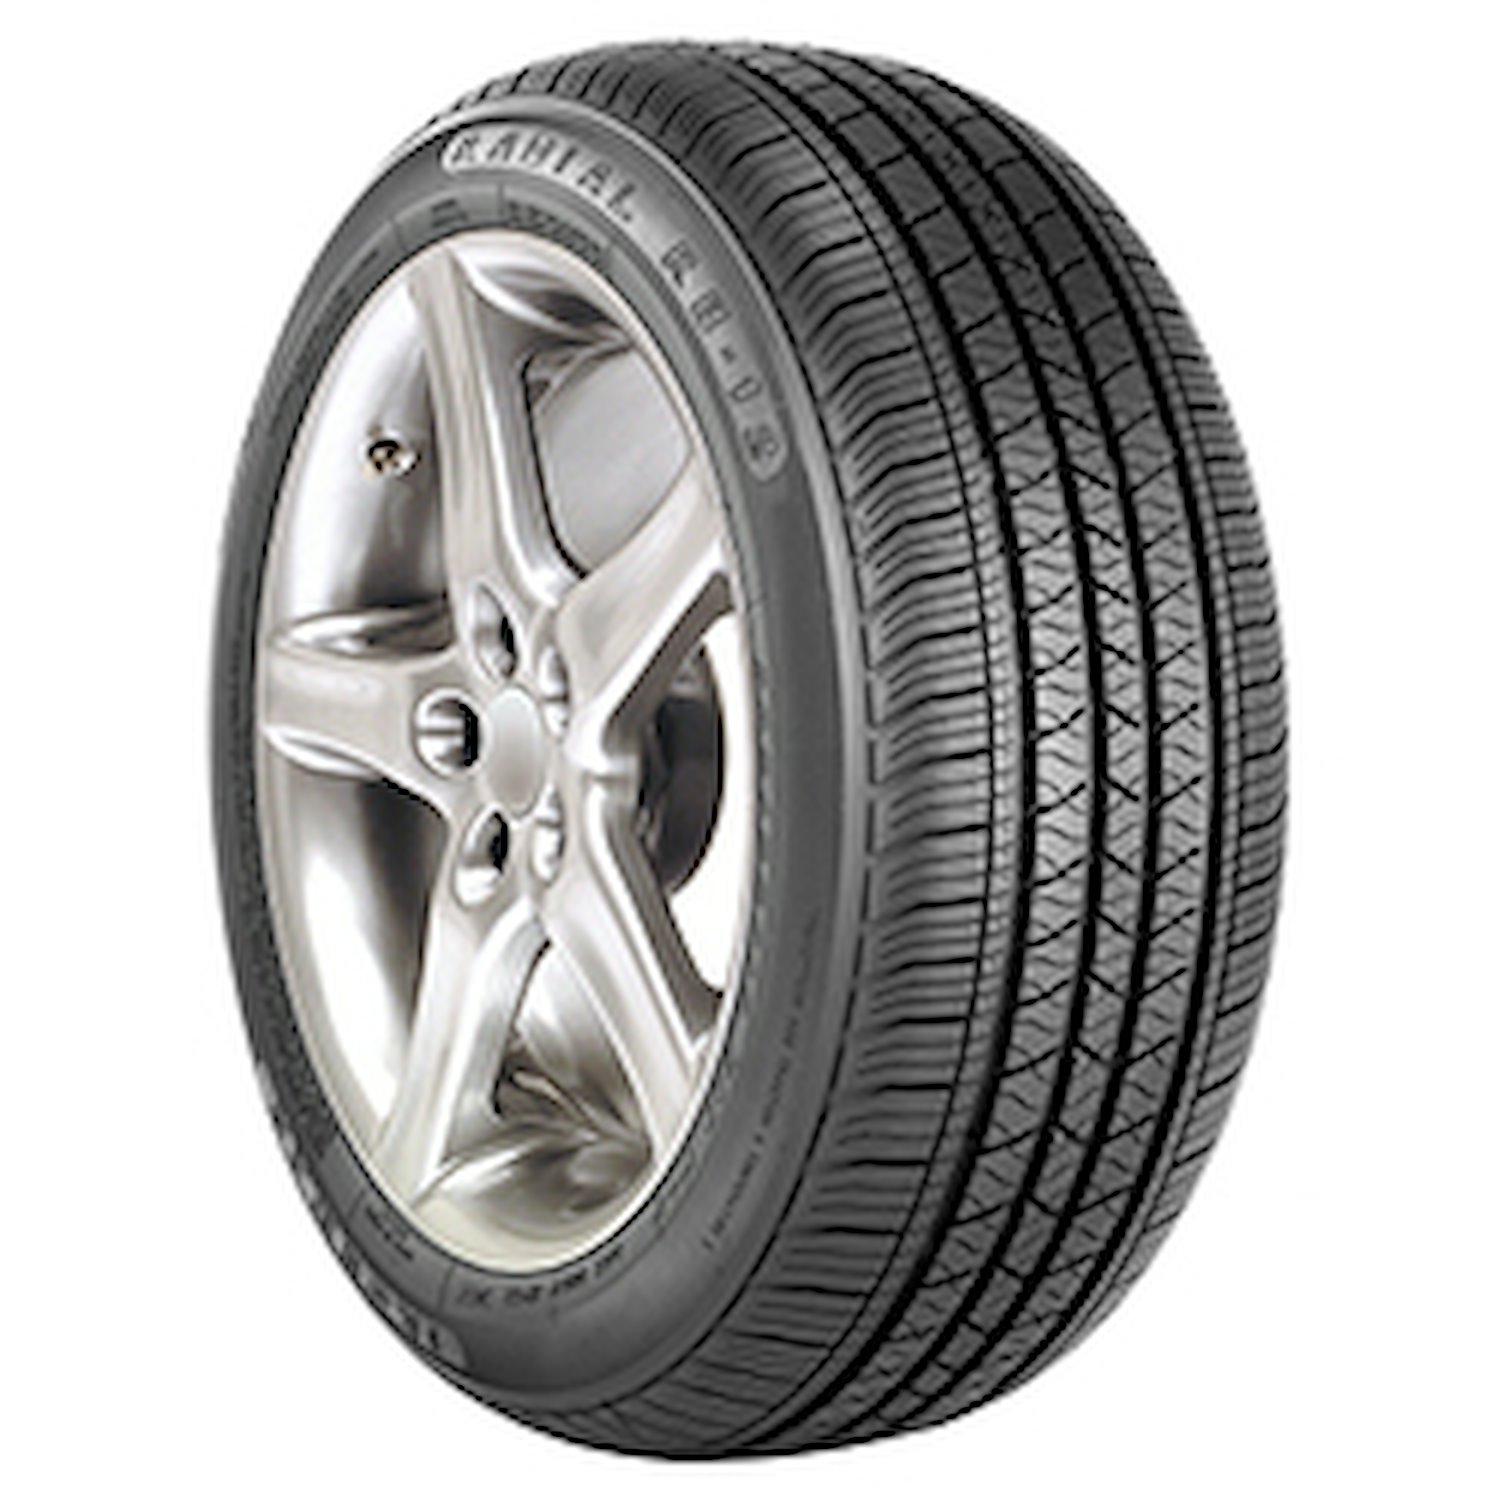 RB-12 Tire, 185/65R14 86T